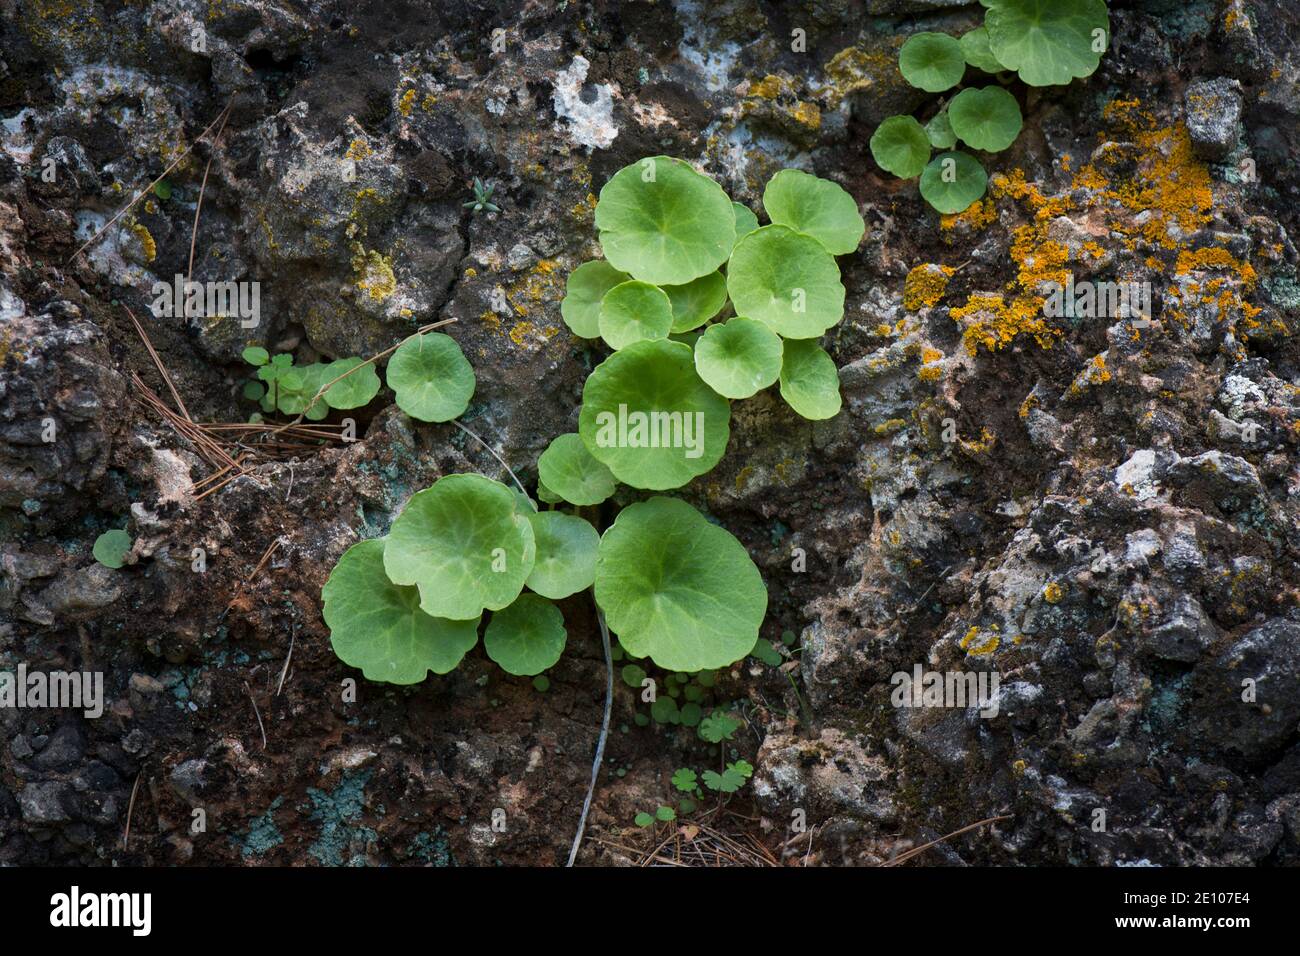 Umbilicus rupestris, navelwort, penny-pies, wall pennywort, growing on a rock, Andalusia, Spain. Stock Photo